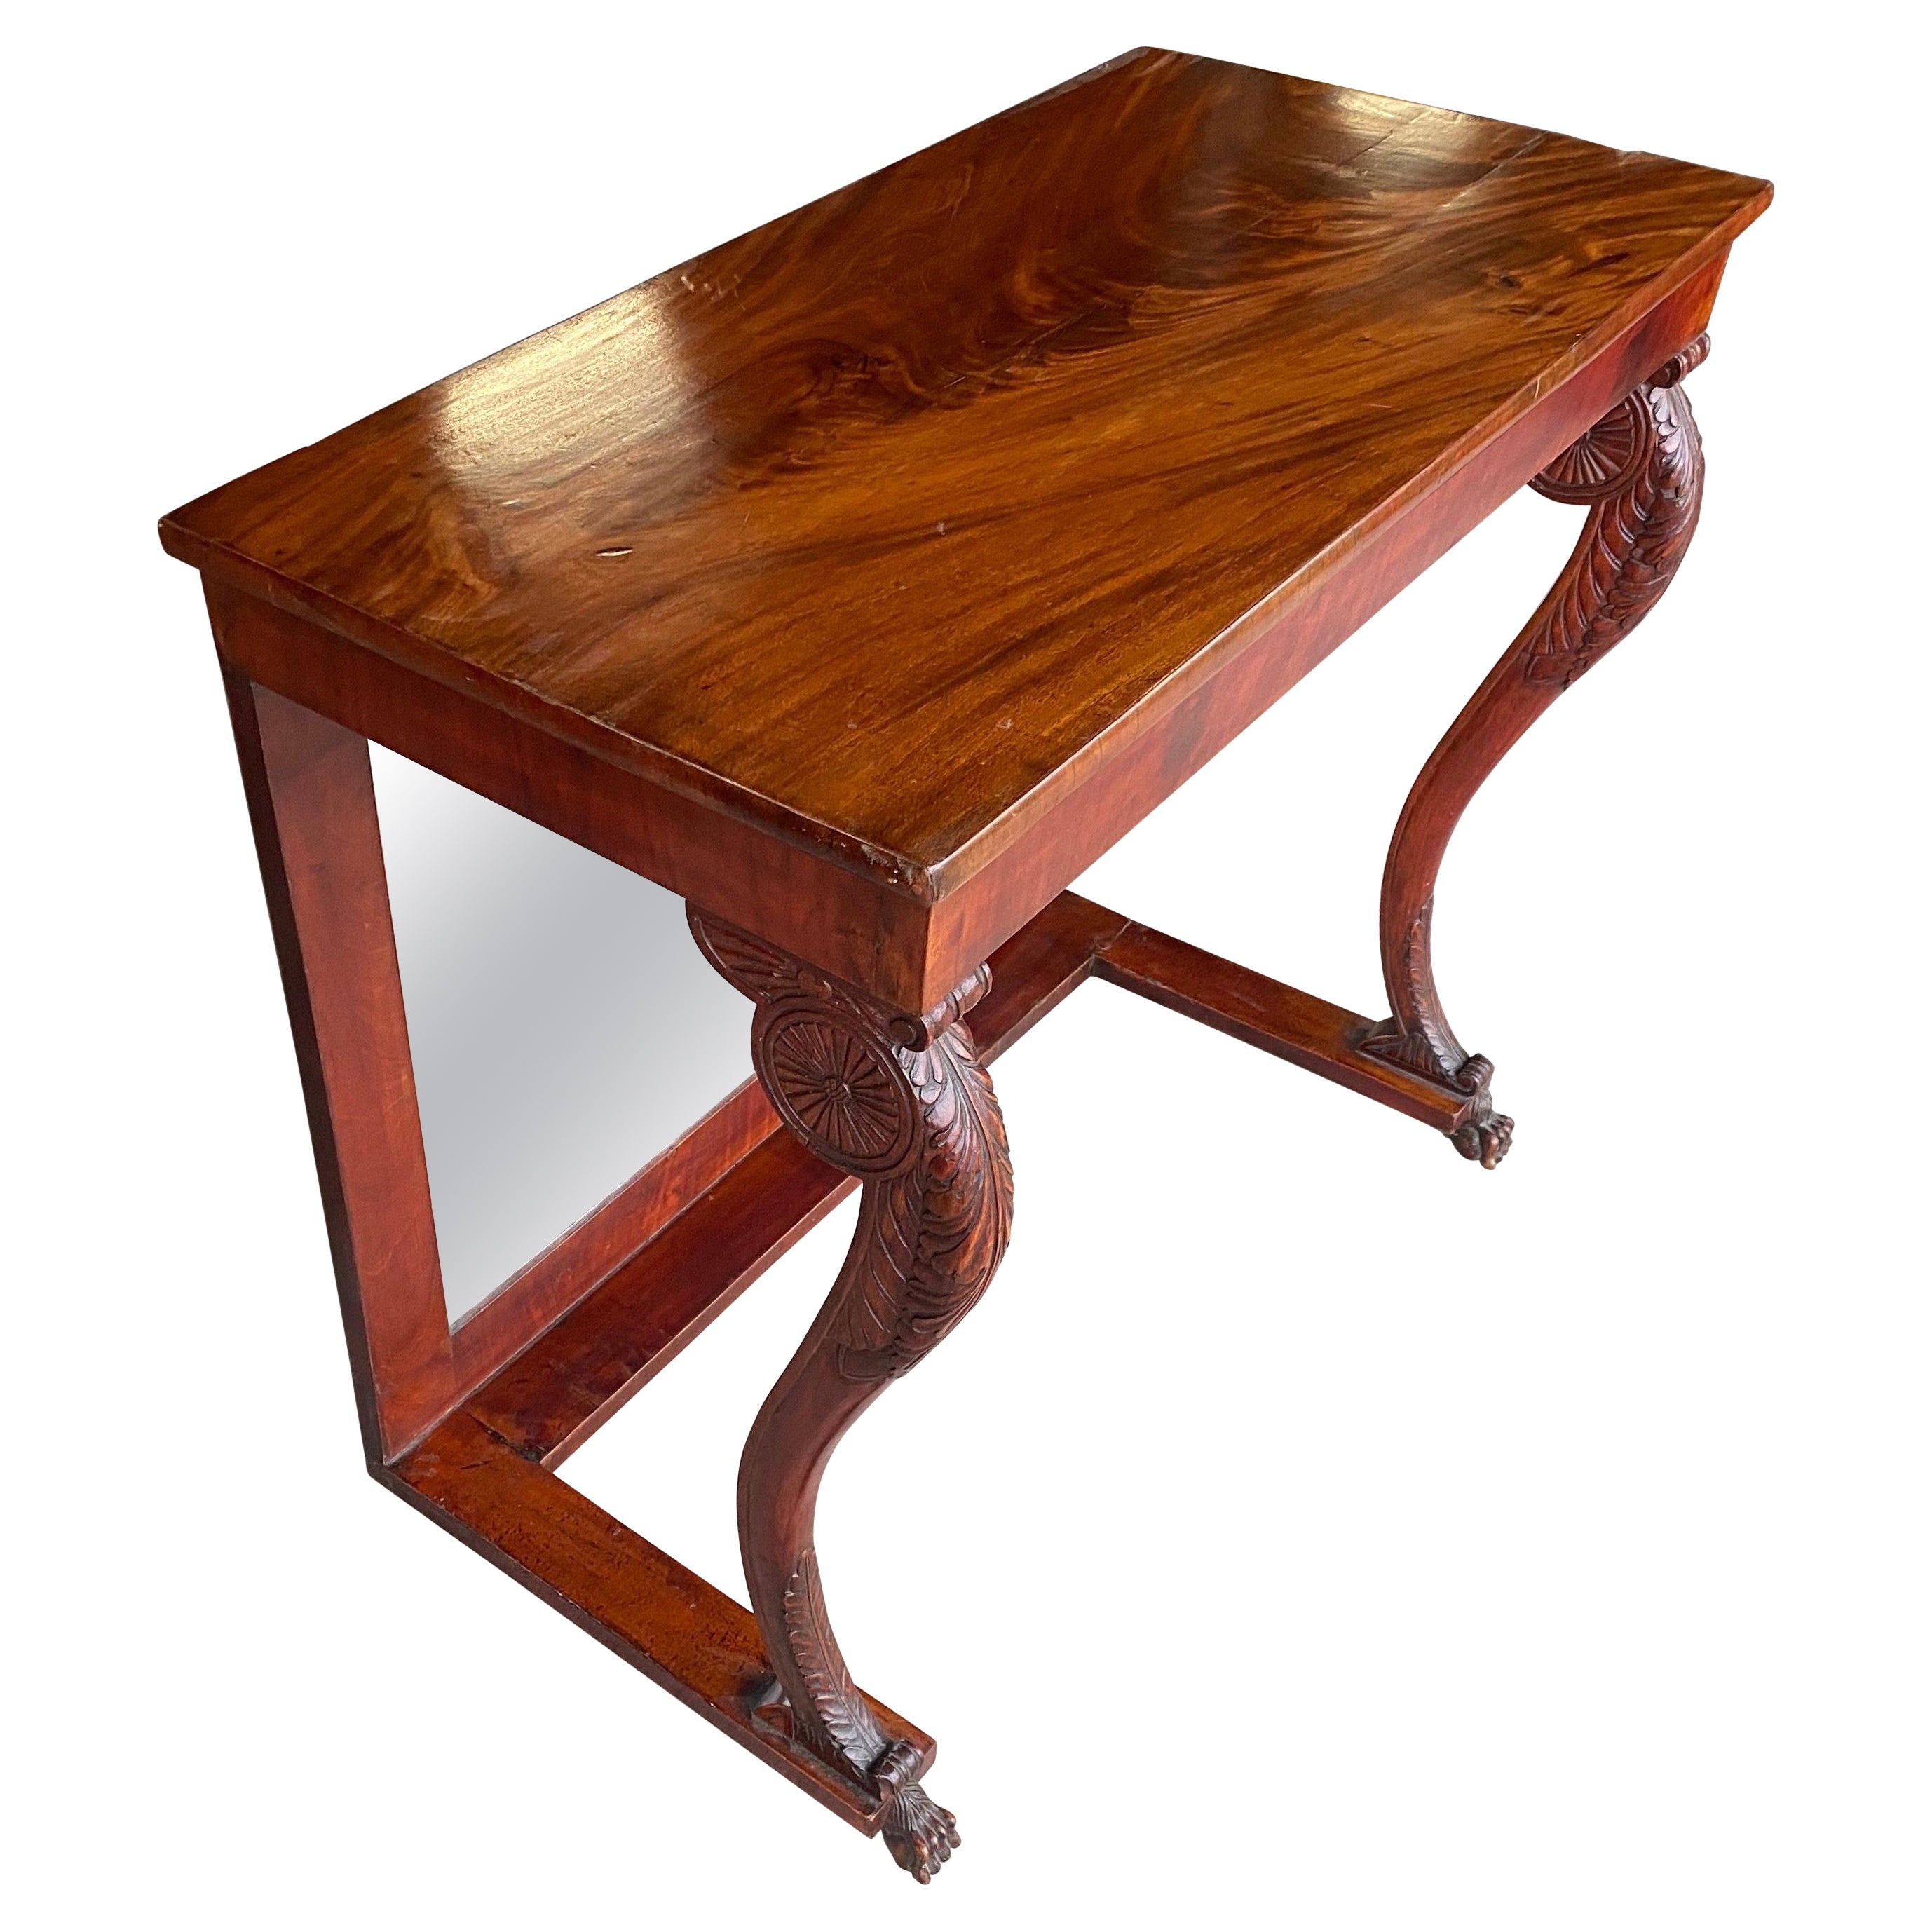 19th century English Regency Mahogany Console with Paw Feet For Sale